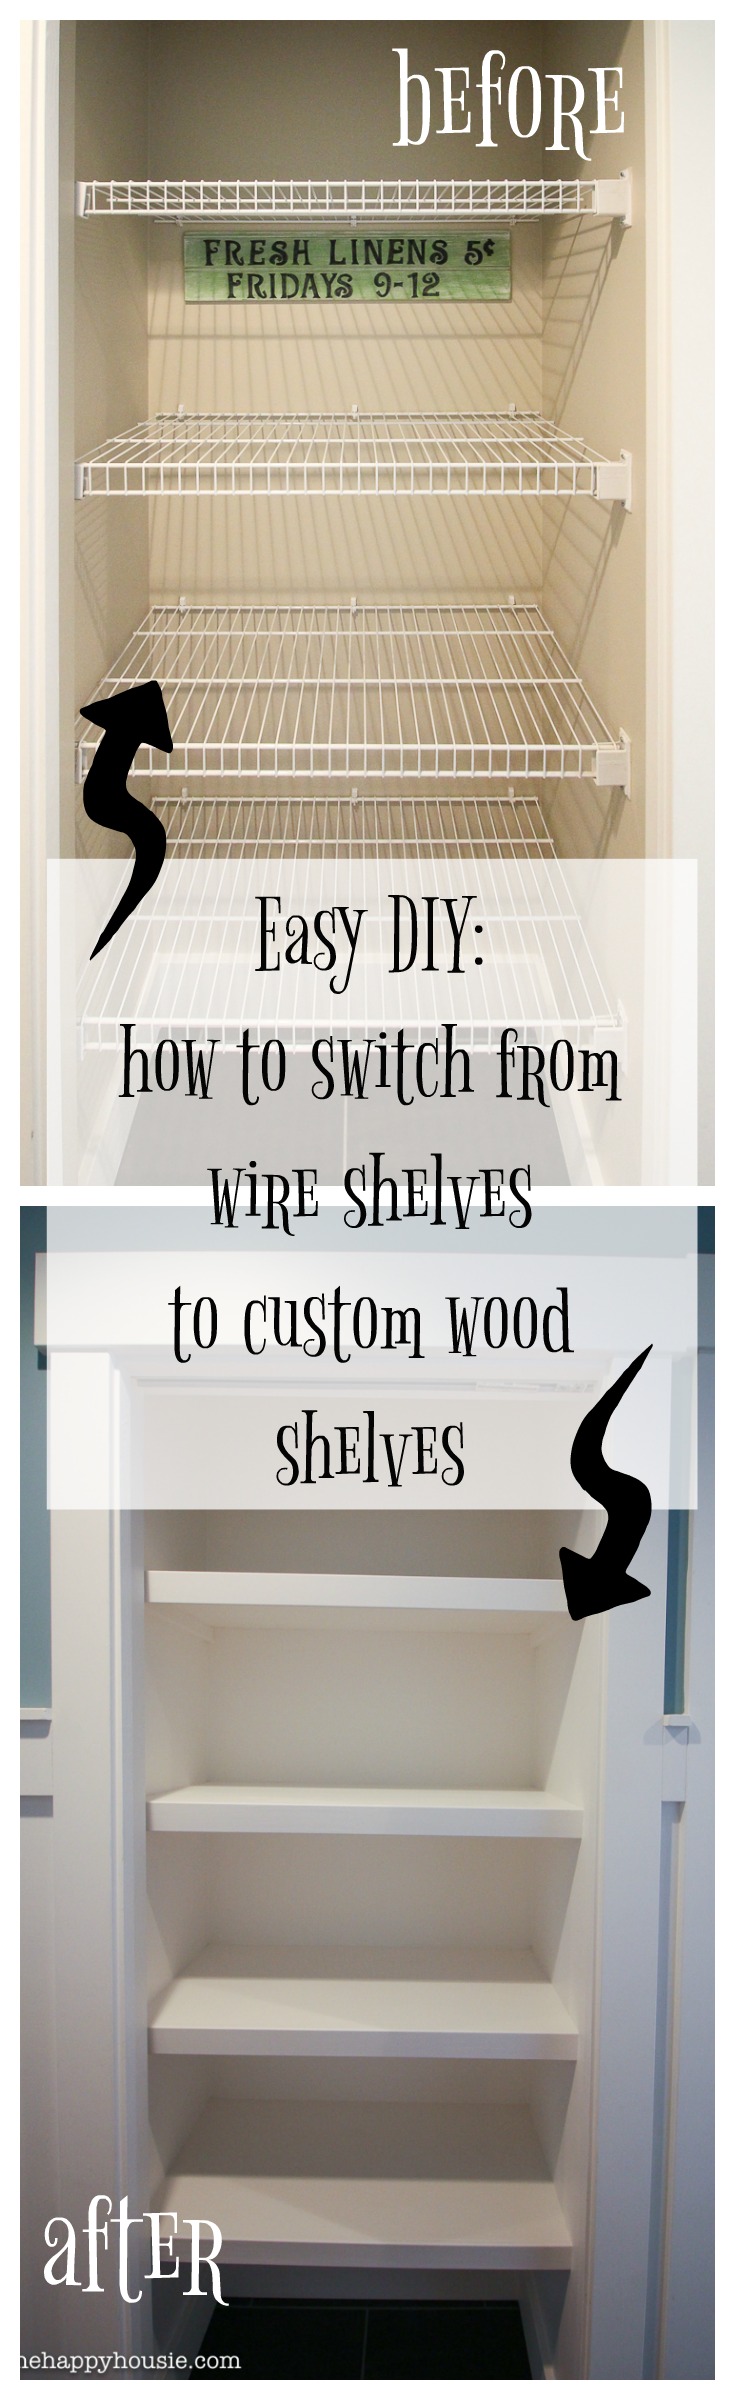 https://www.thehappyhousie.com/wp-content/uploads/2017/02/Easy-DIY-how-to-switch-your-builder-basic-wire-shelving-to-custom-looking-wooden-shelving-.jpg